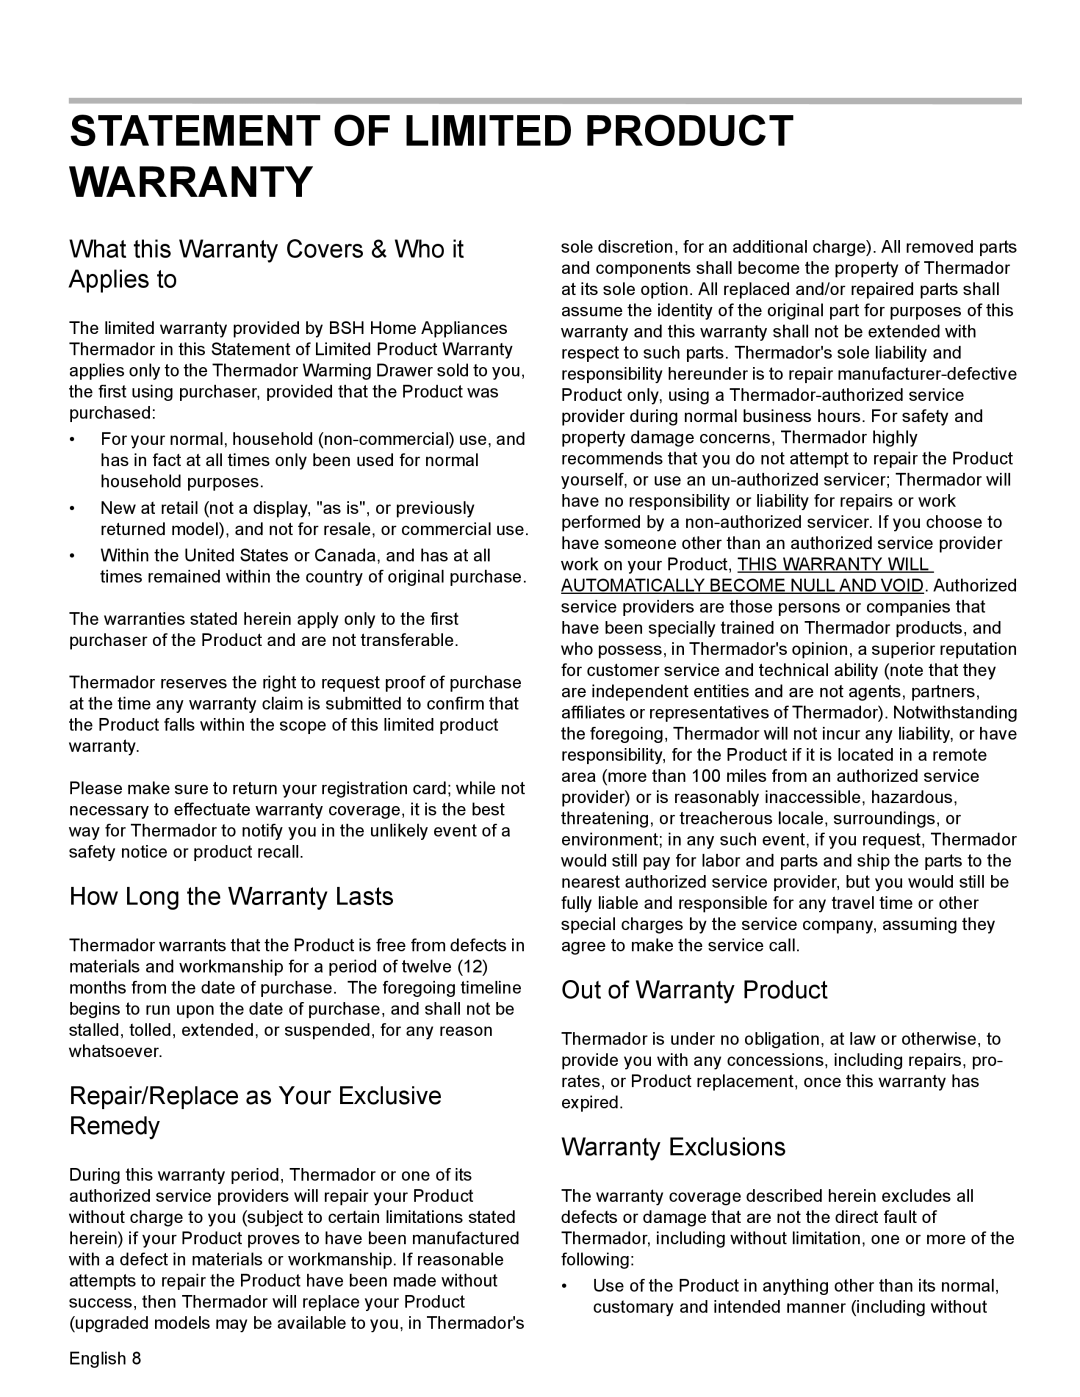 Thermador WD30 Statement Of Limited Product Warranty, What this Warranty Covers & Who it Applies to, Warranty Exclusions 